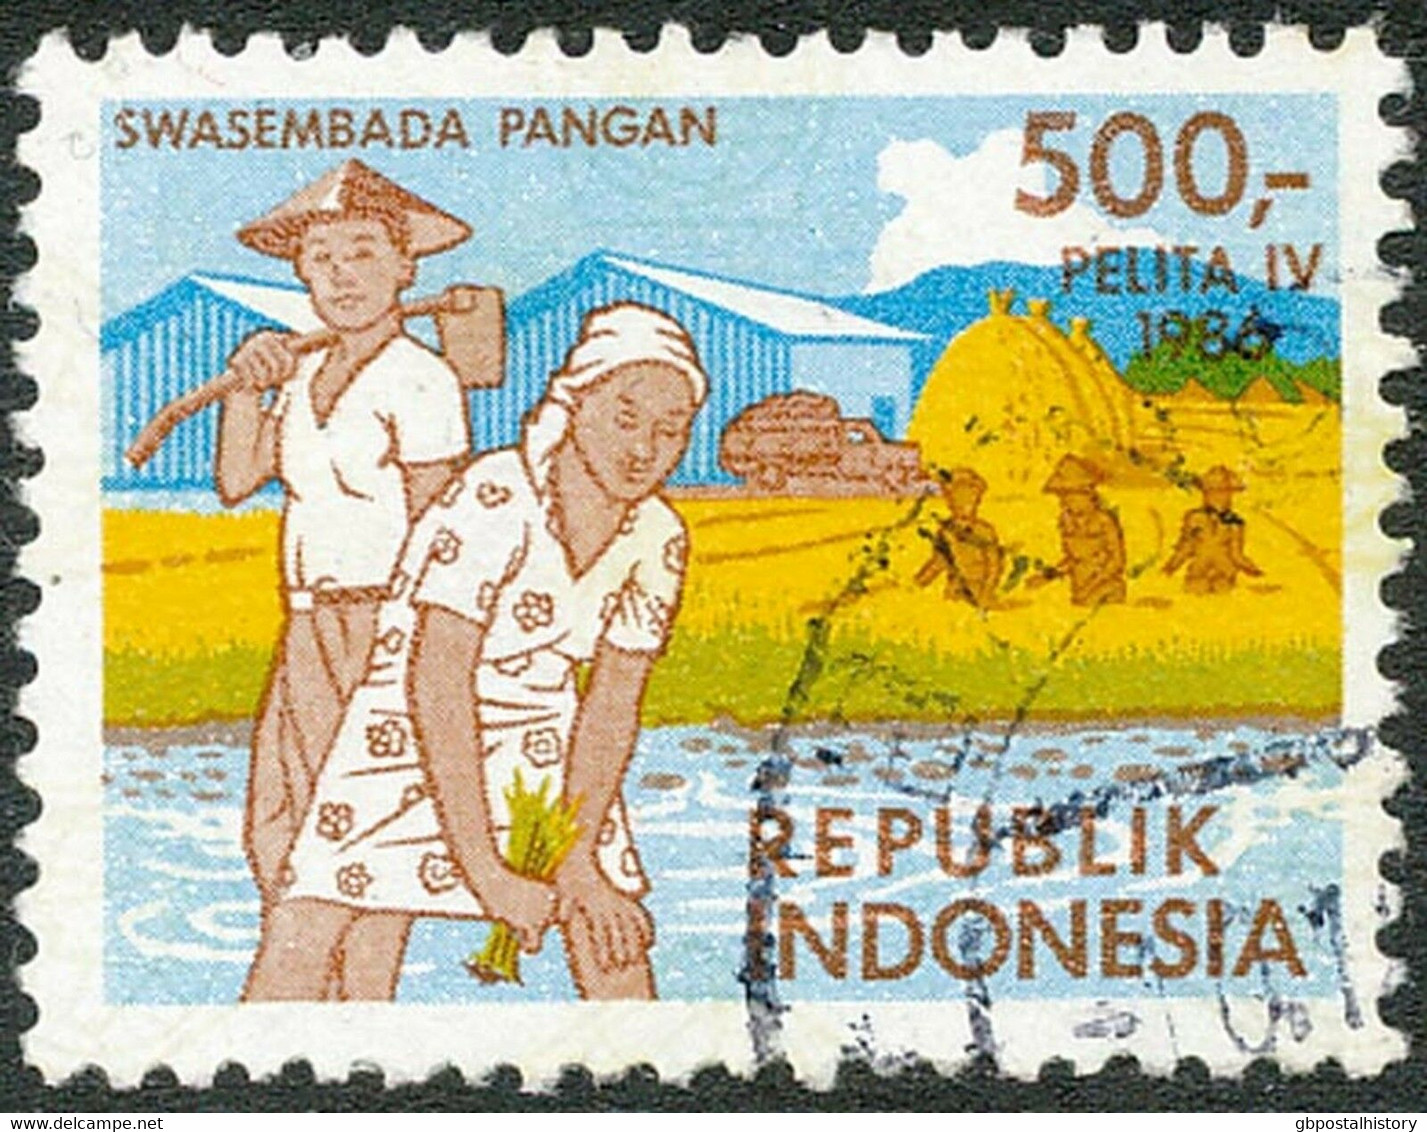 INDONESIA 1986 4th.Five-year Plan Rice Fields 500 Rp VARIETY MISSING BROWN COLOR - Indonésie